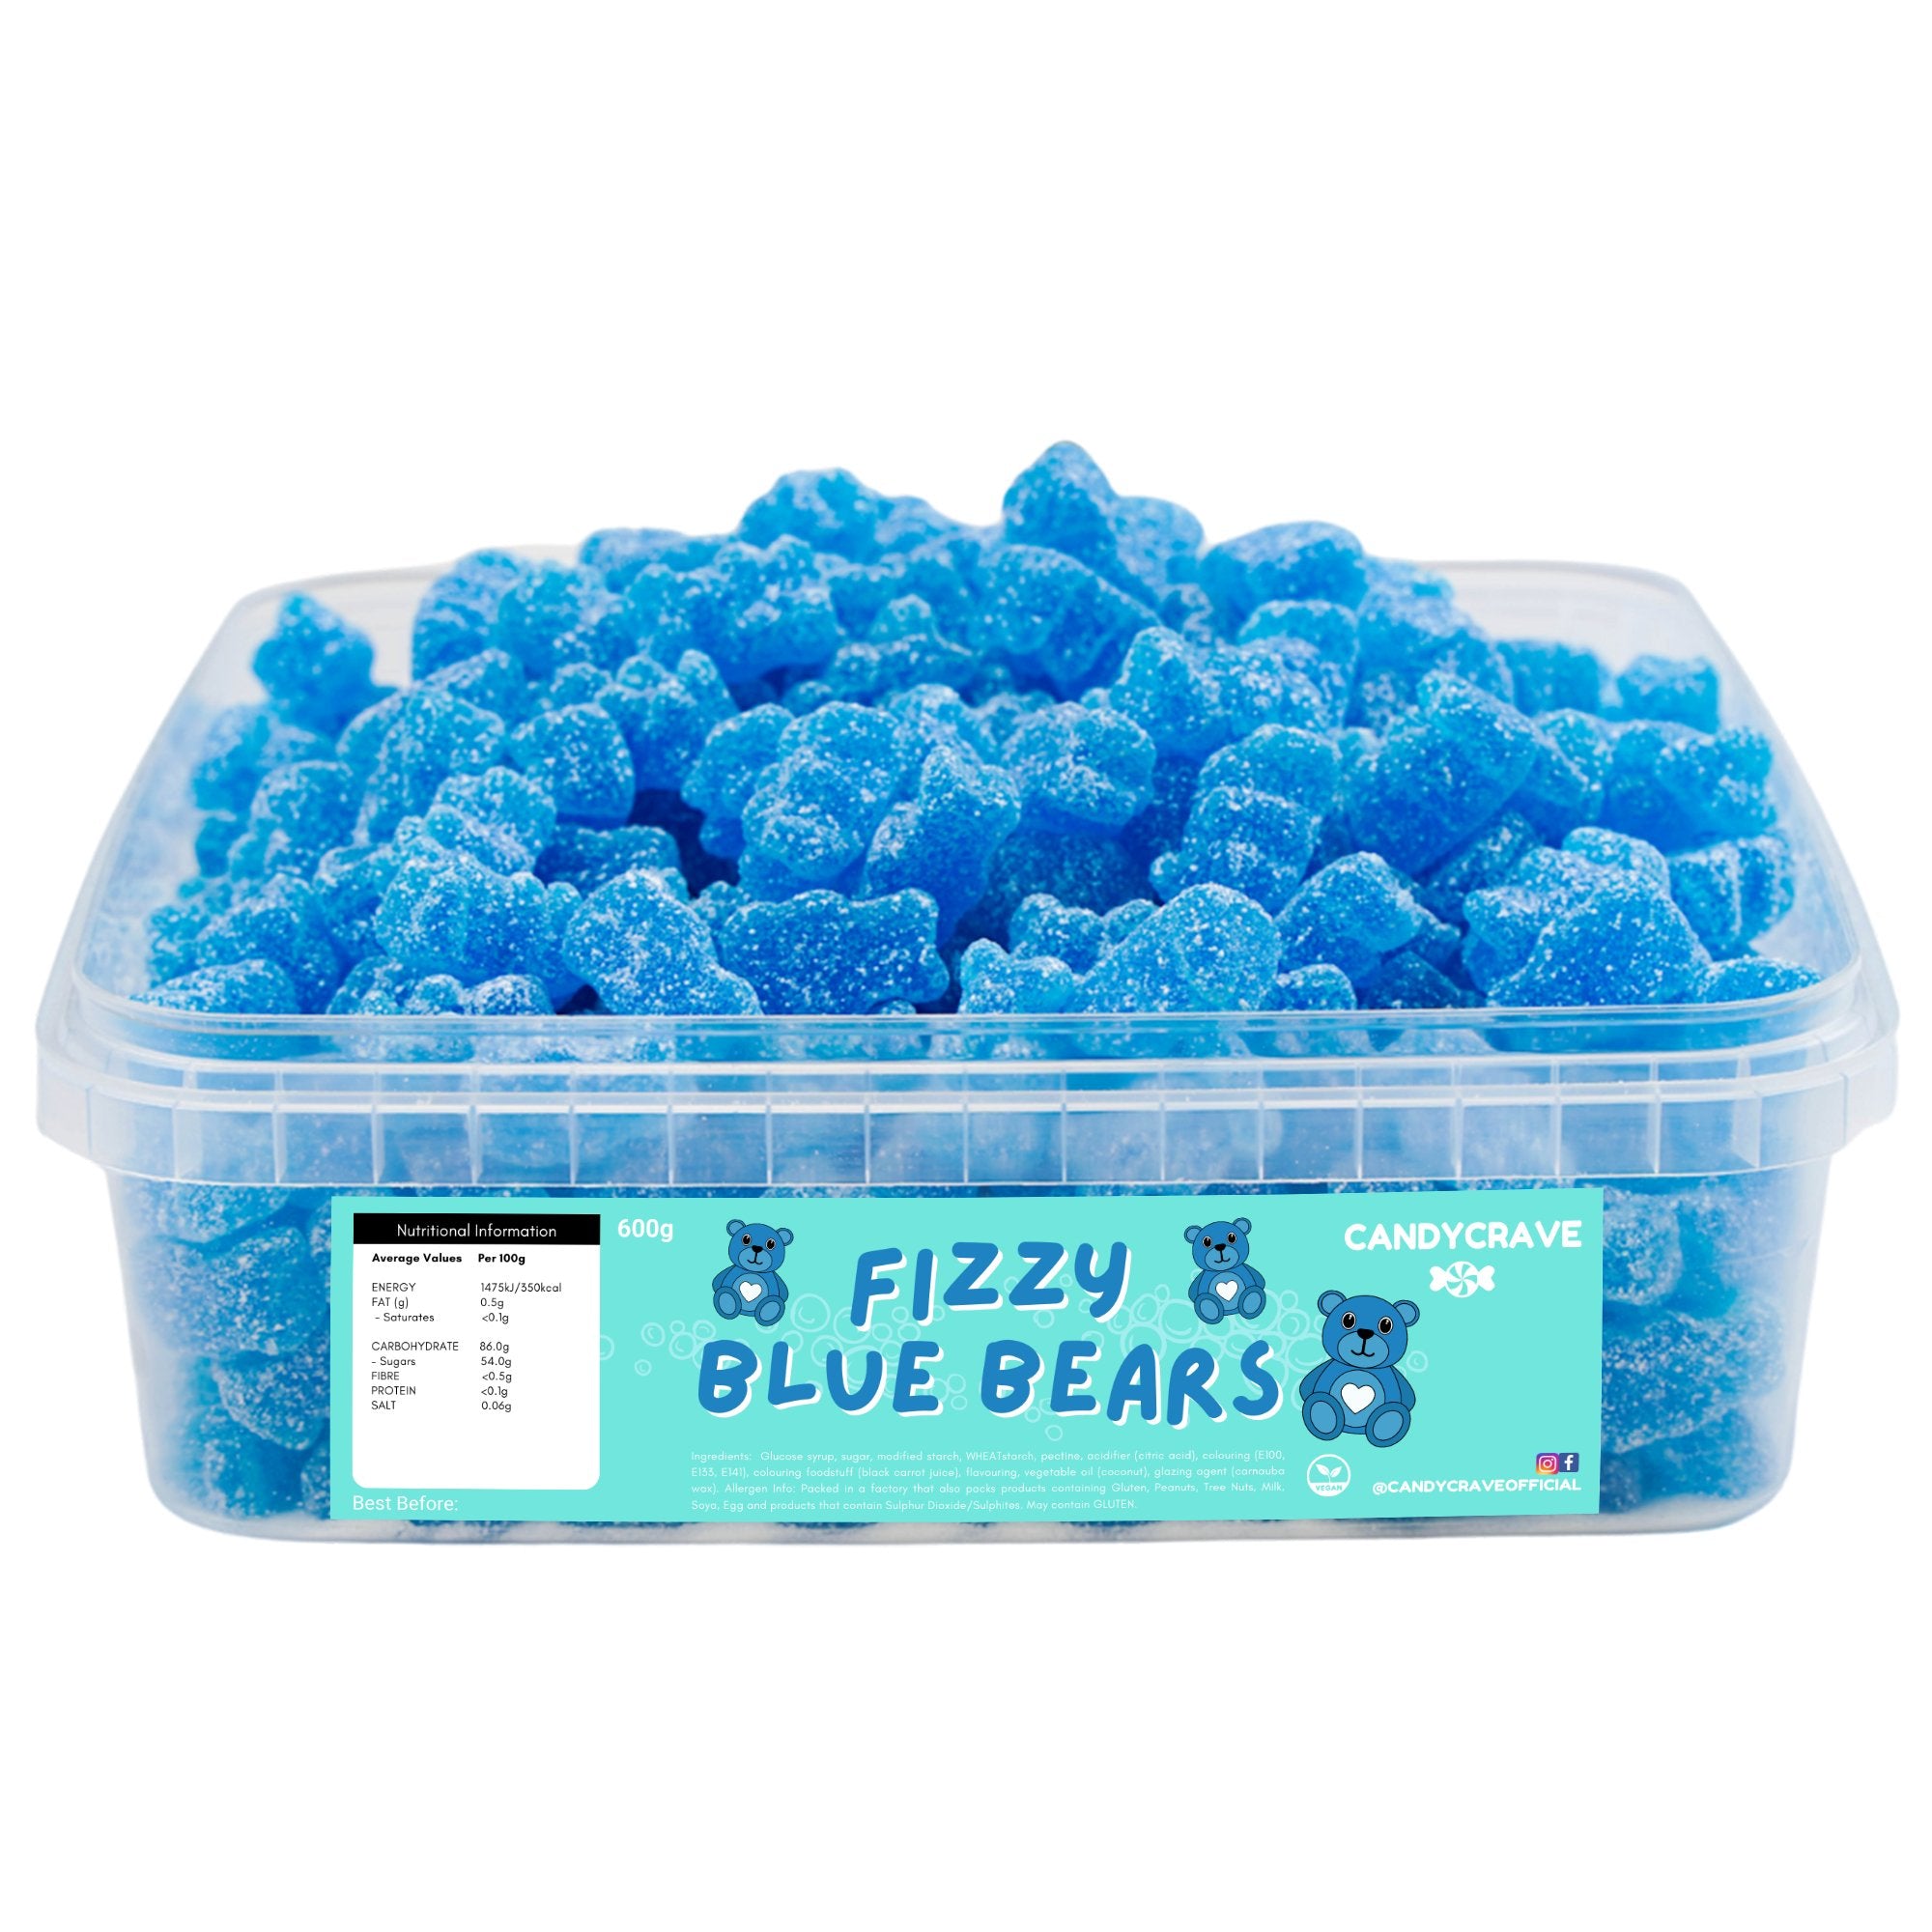 Candy Crave Fizzy Blue Bears Tub 600g - Jessica's Sweets